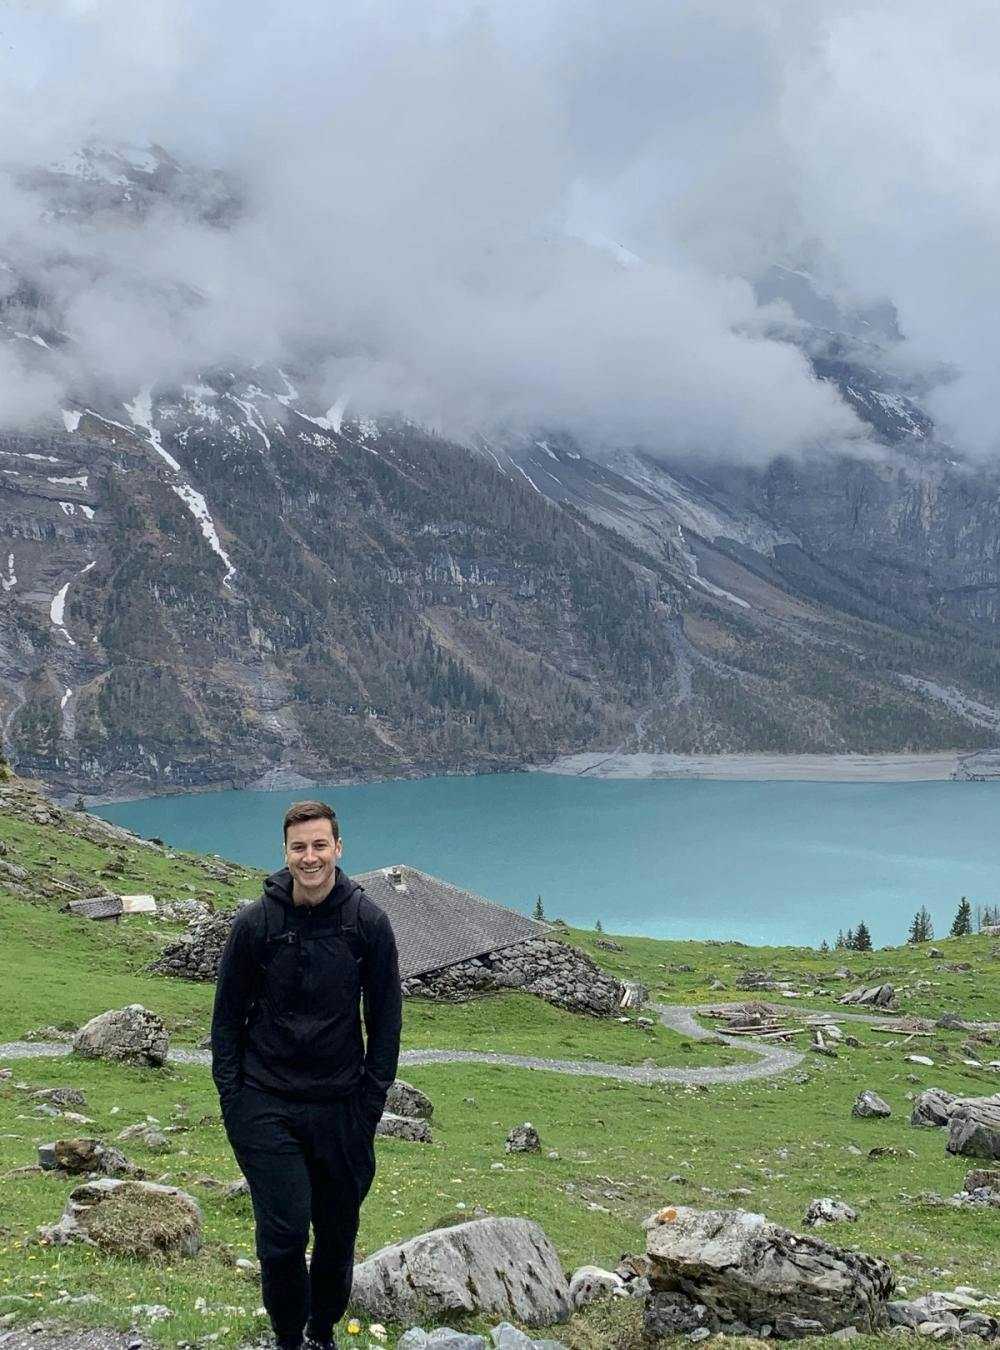 Kieran smiling in front a cloudy mountain and blue lake